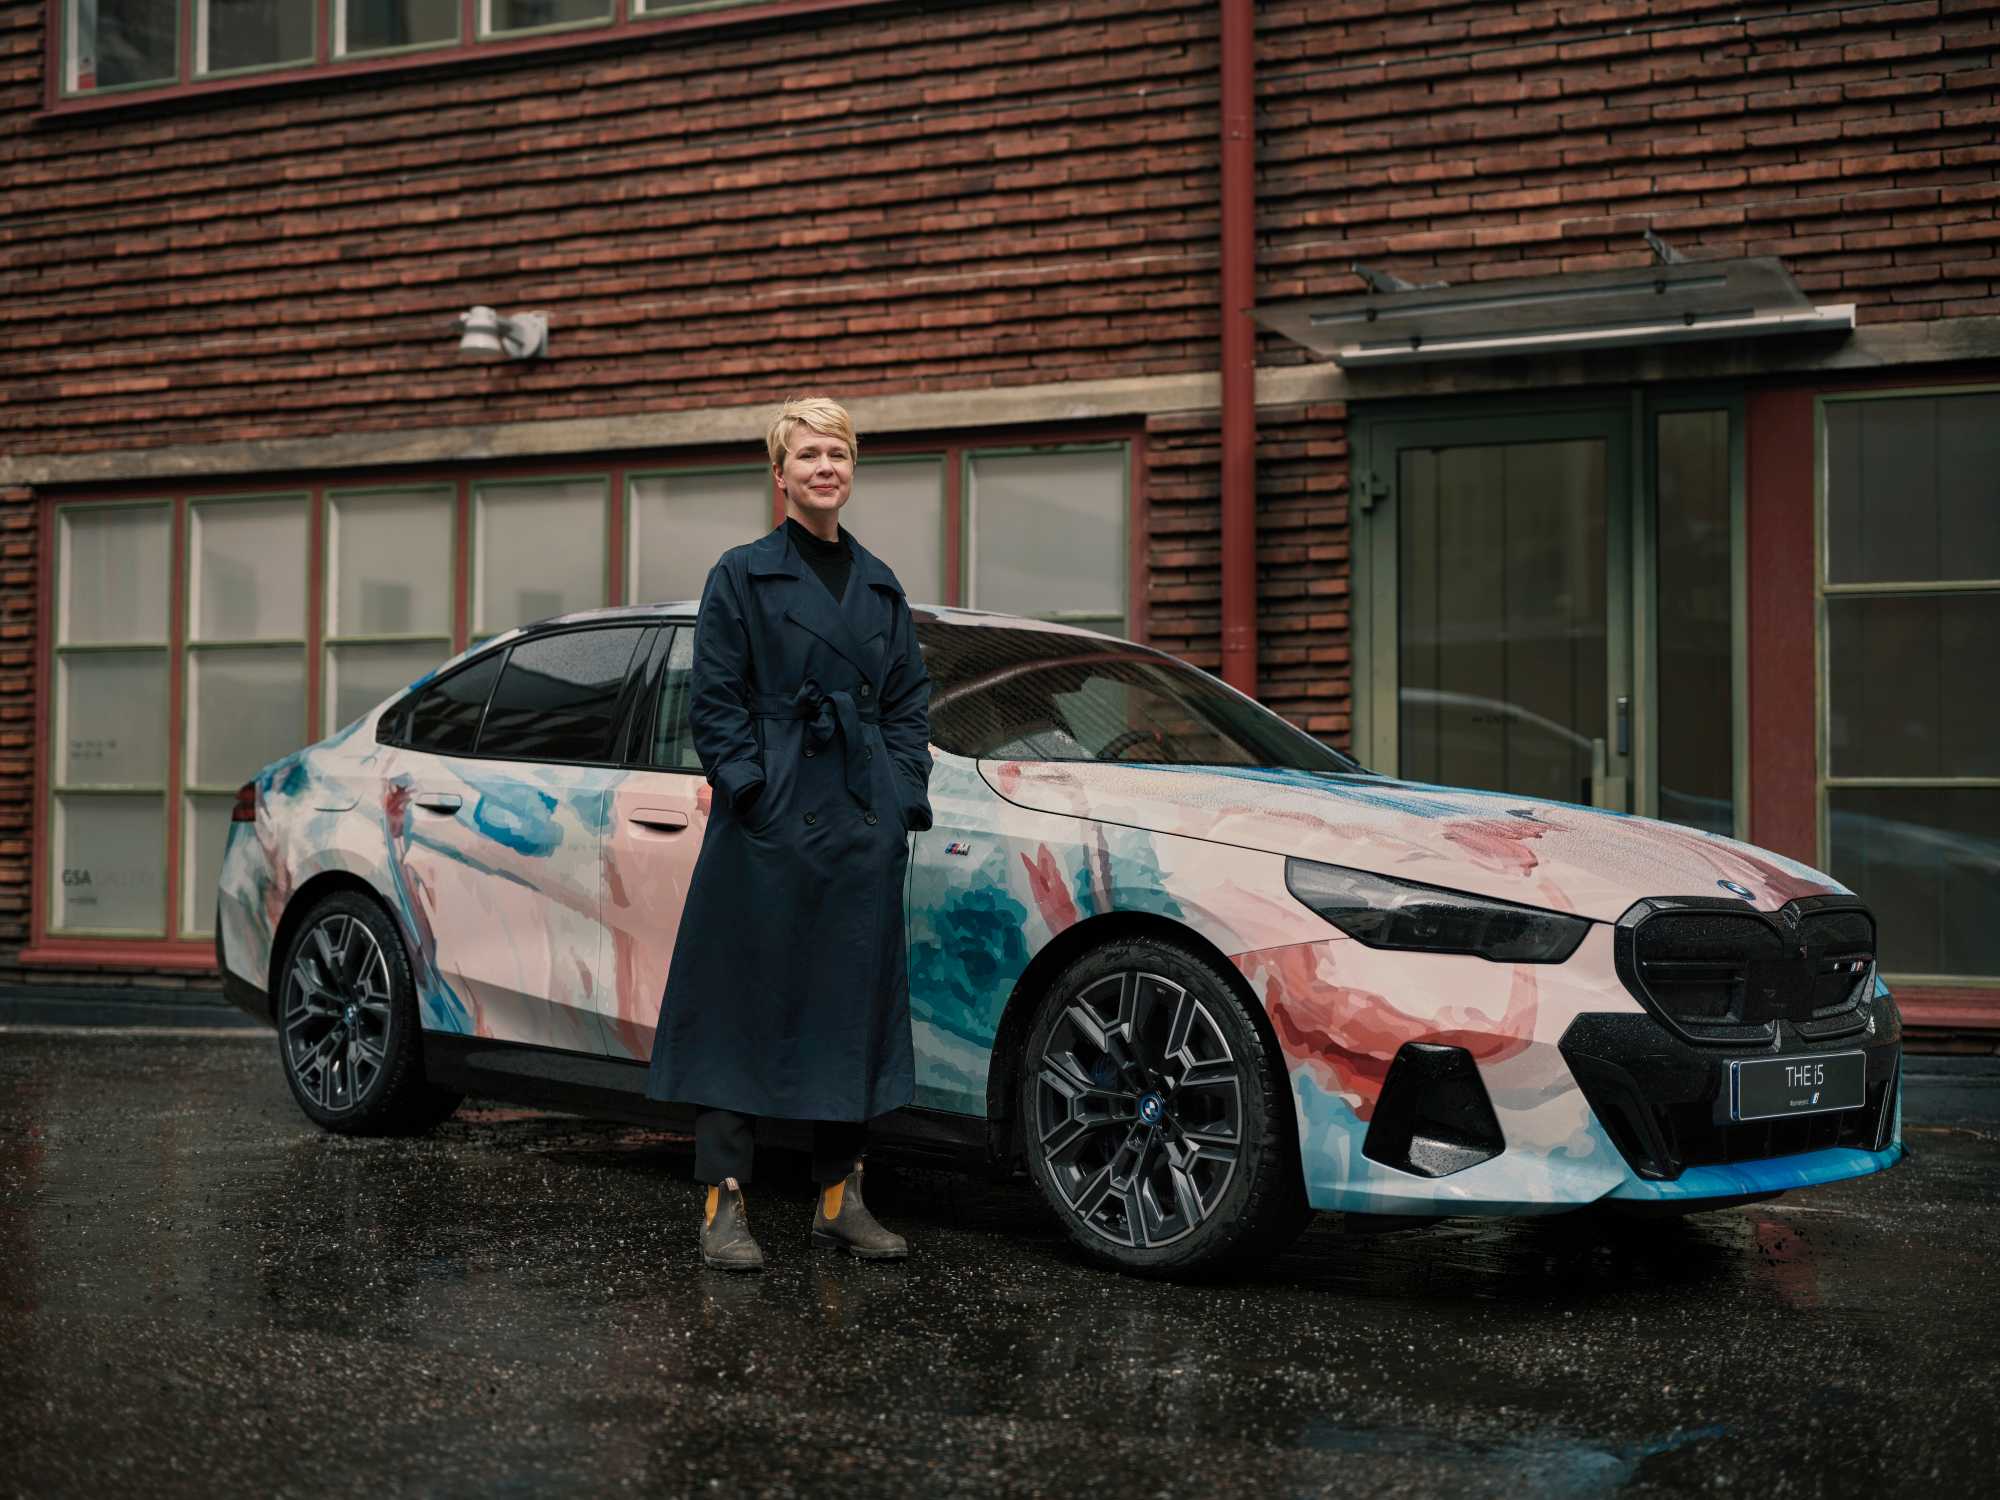 Swedish artist Karin Westman creates this year's mobile artwork at Market Art Fair. Initiative is inspired by the famous BMW Art Car series.